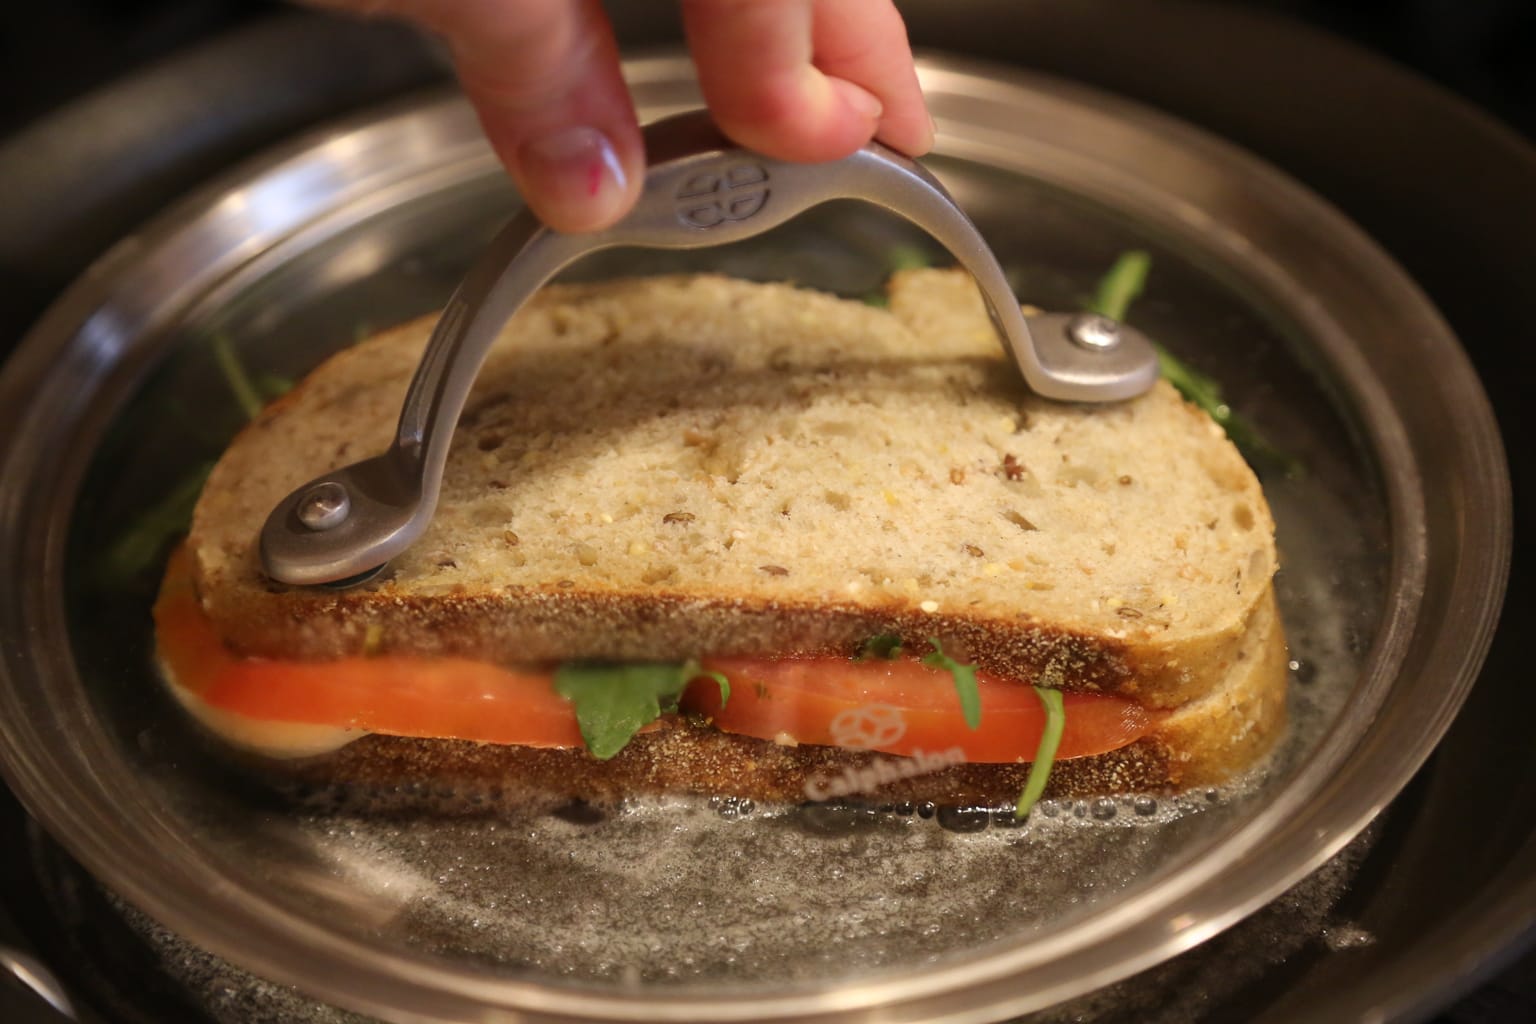 Child pressing down panini with a pan's lid as it cooks on stove